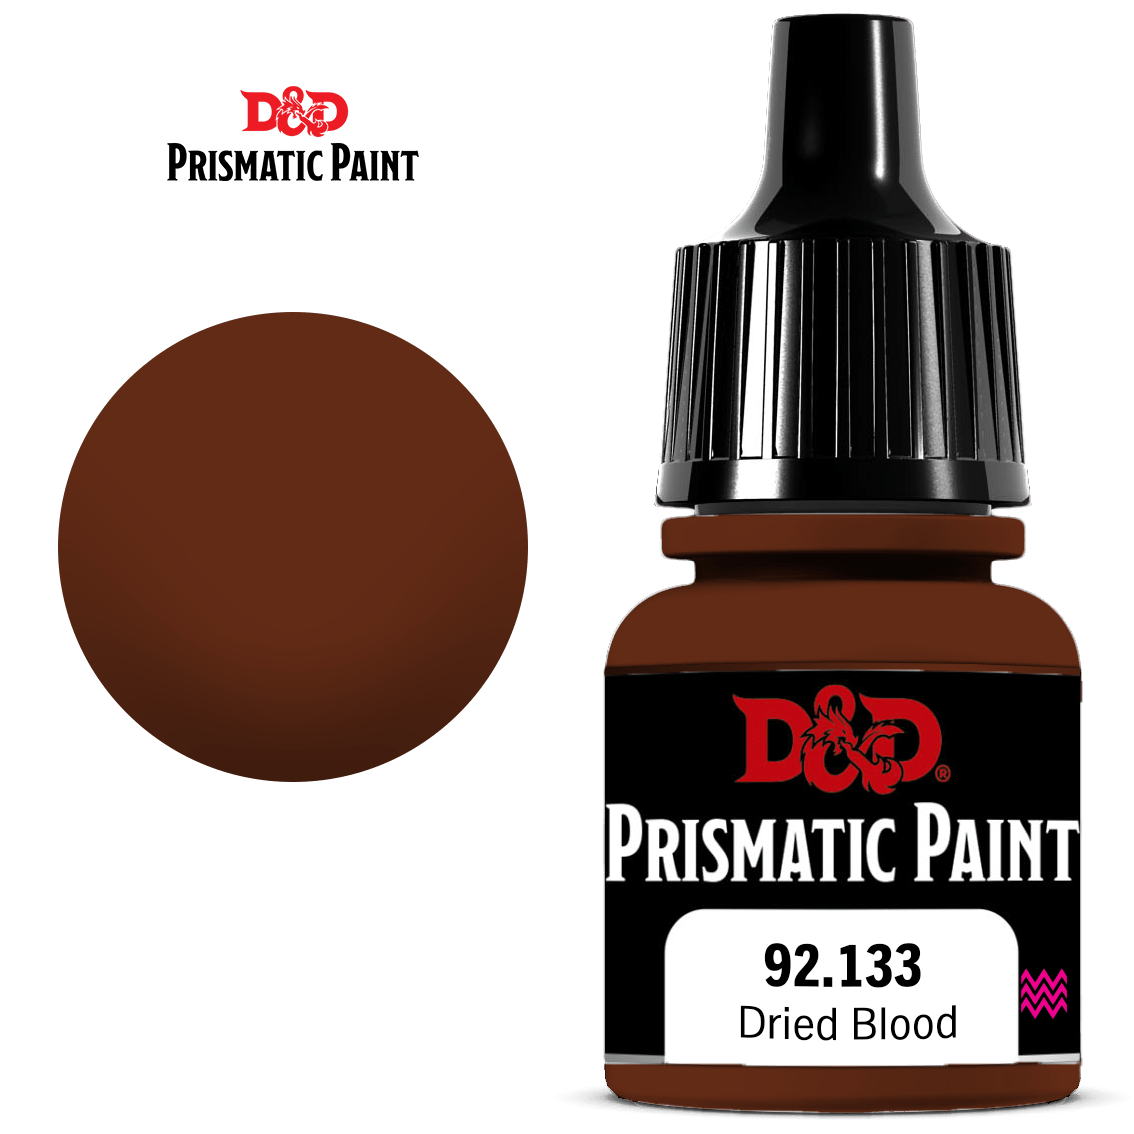 PRISMATIC PAINT: DRIED BLOOD EFFECT | BD Cosmos